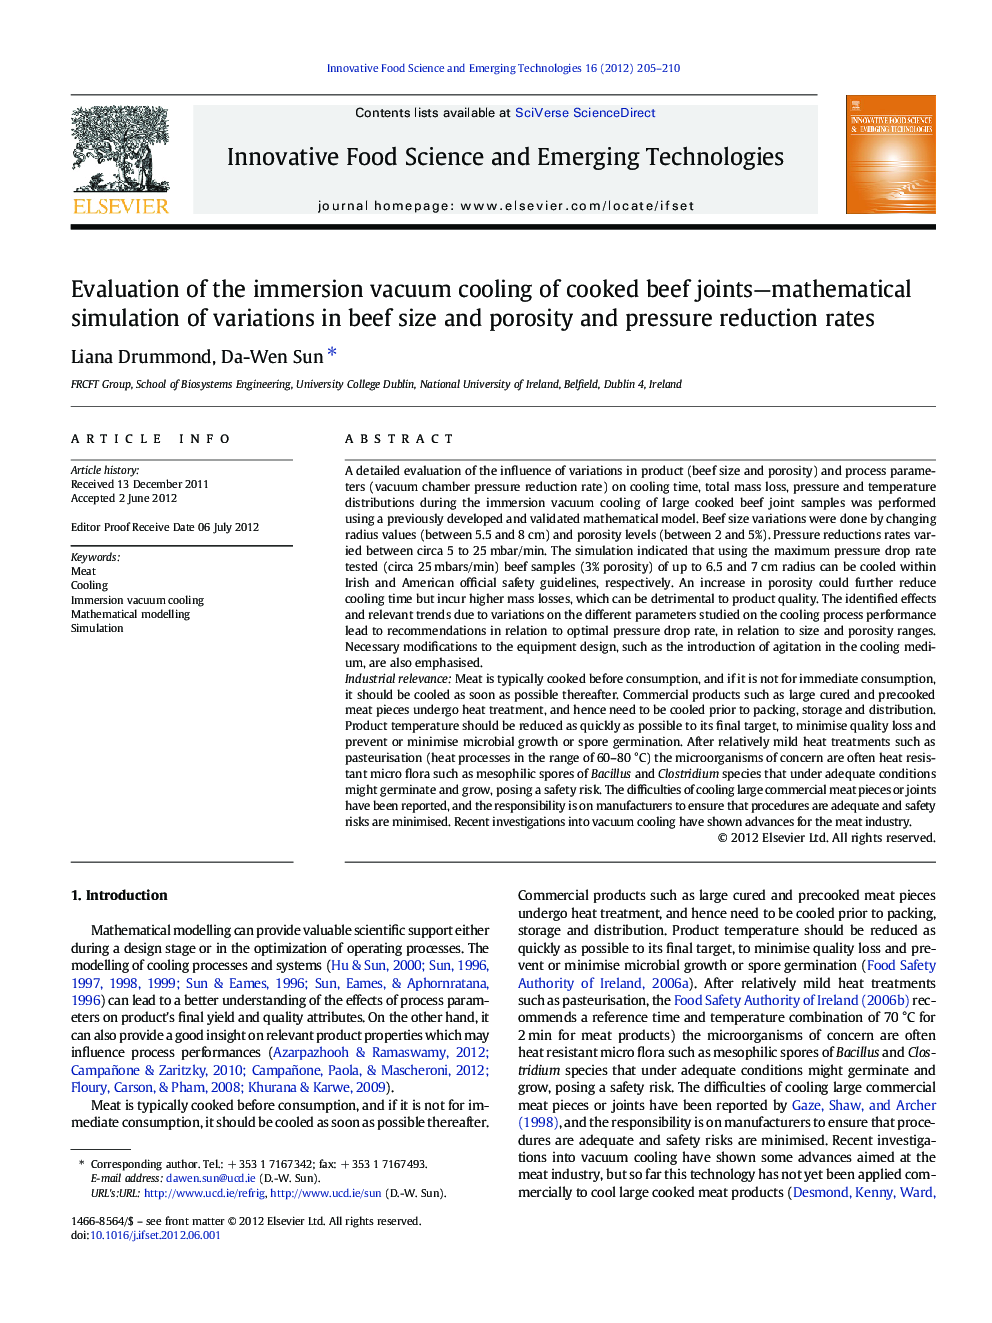 Evaluation of the immersion vacuum cooling of cooked beef joints—mathematical simulation of variations in beef size and porosity and pressure reduction rates